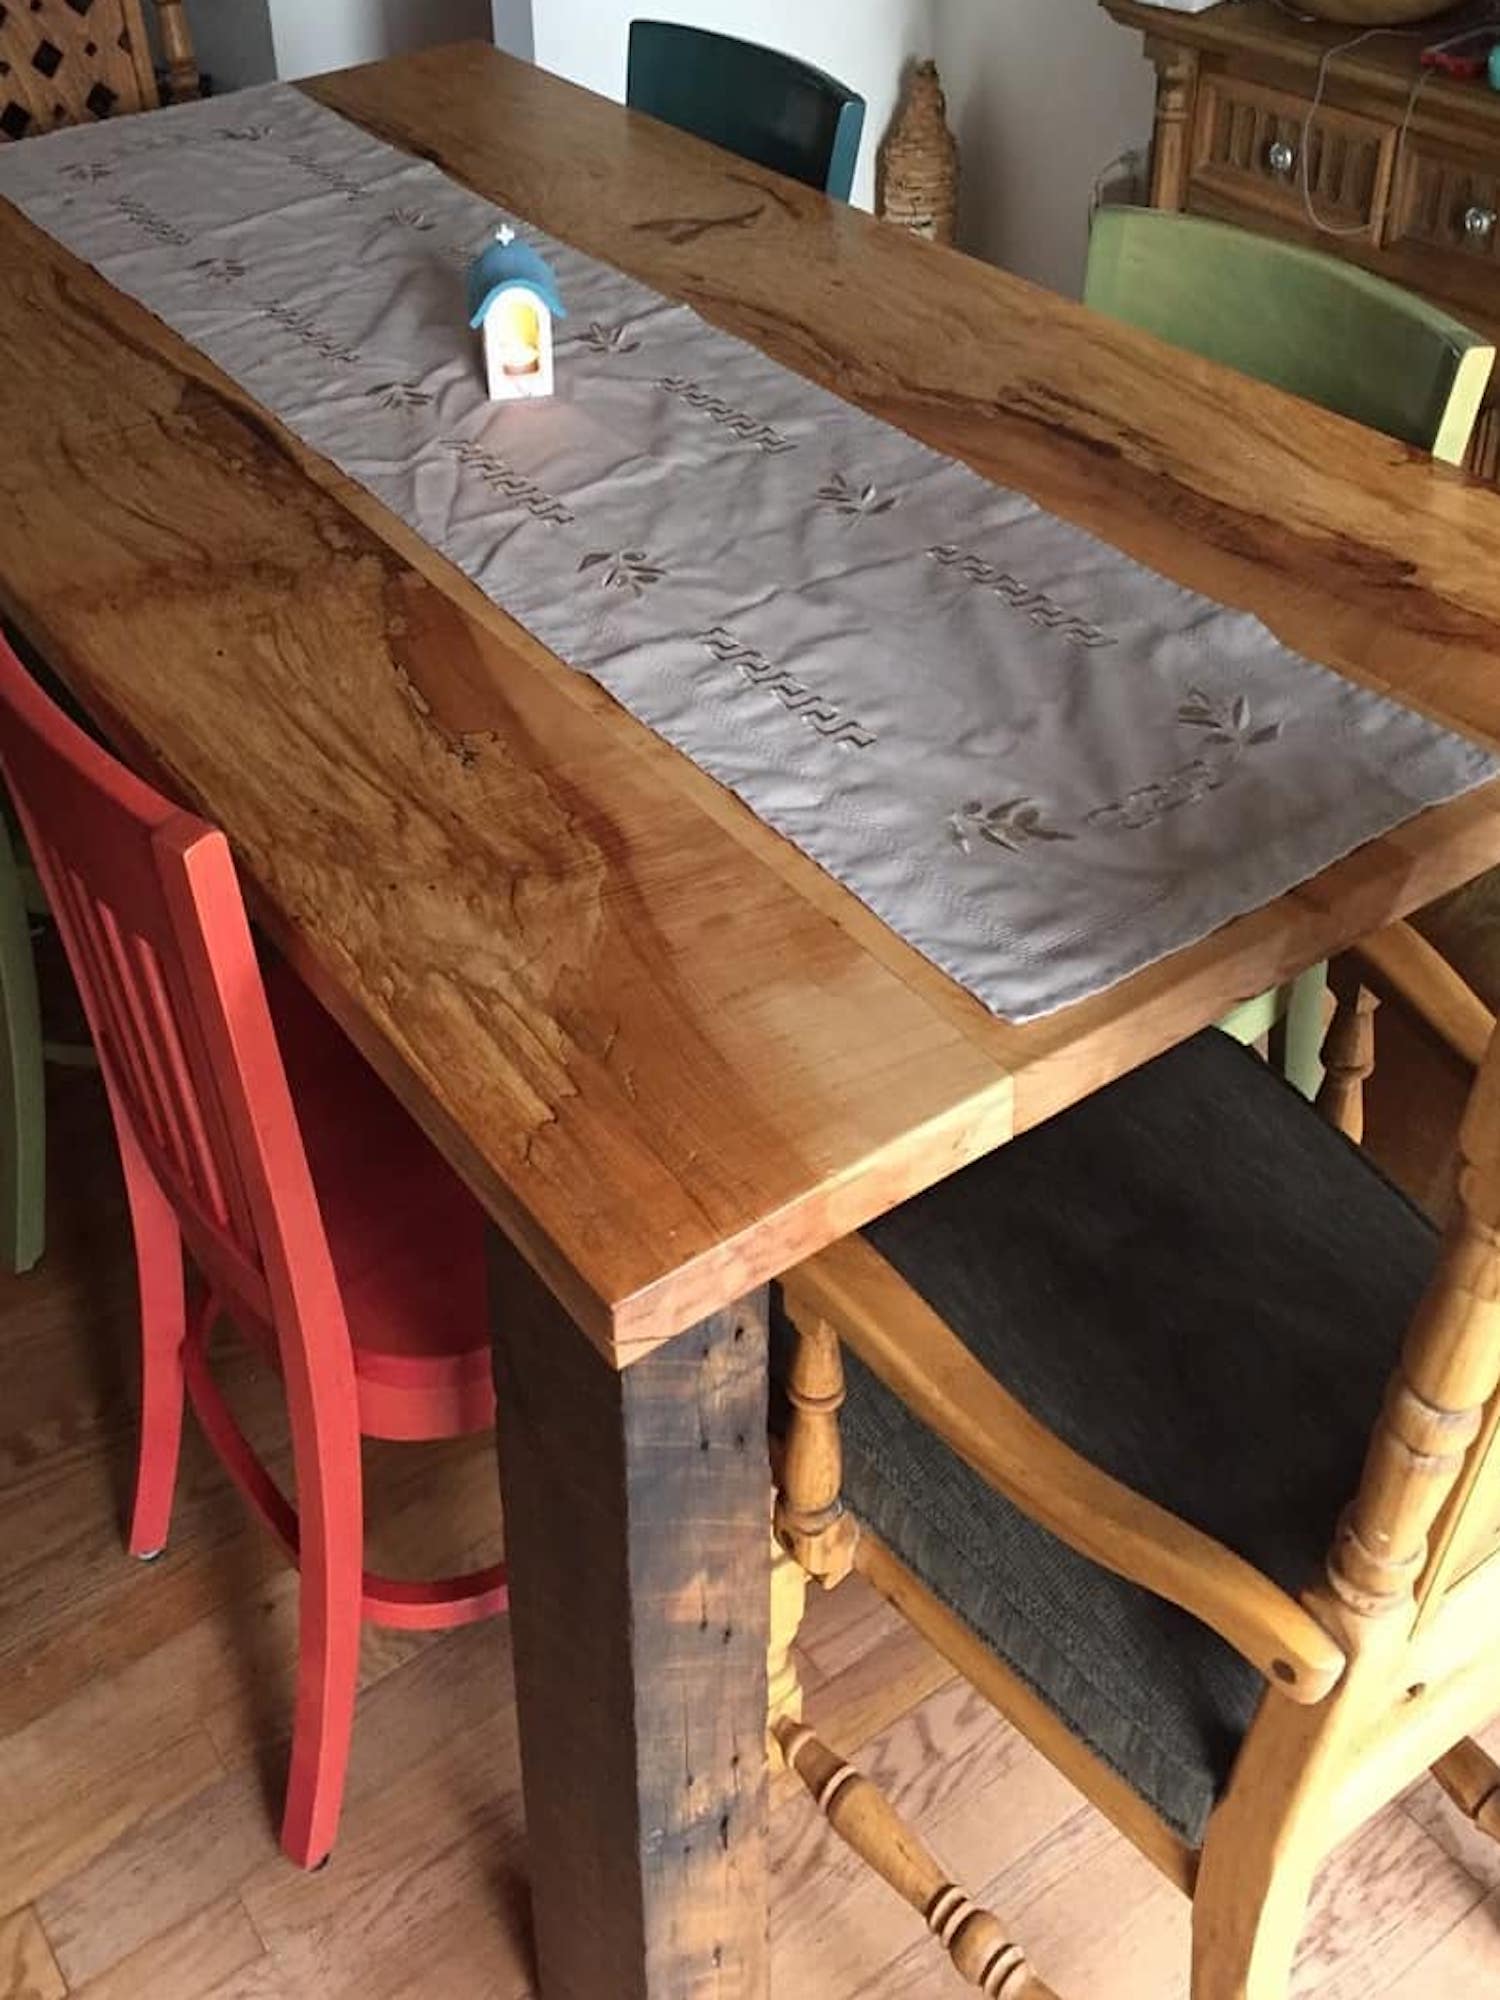 A barnwood table designed and made by a customer